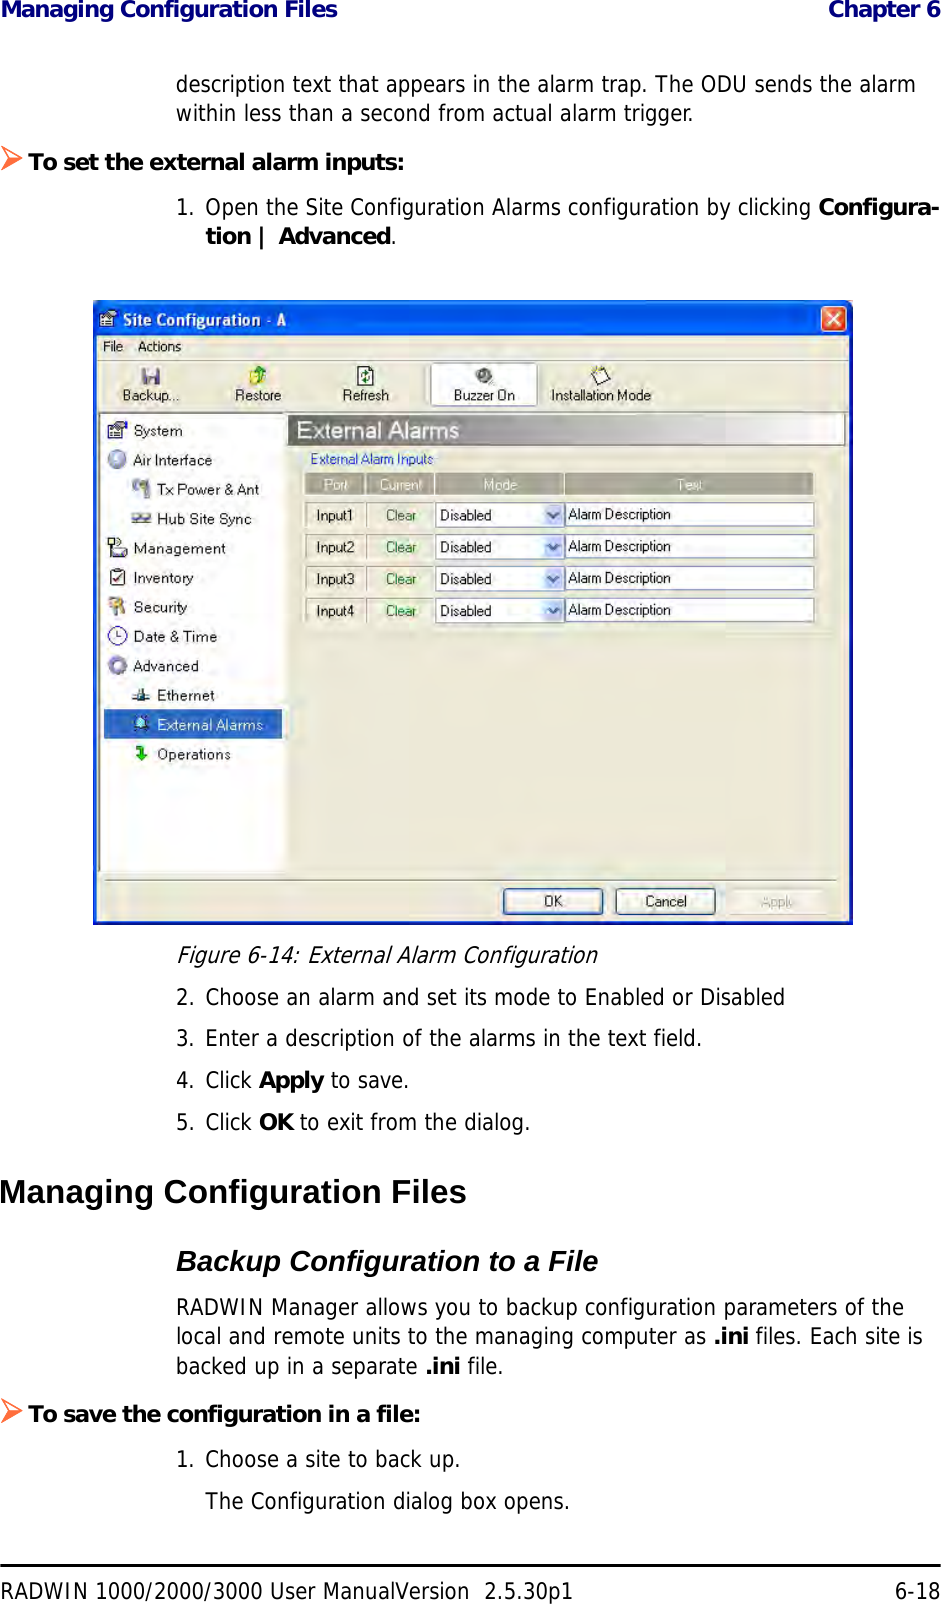 Managing Configuration Files  Chapter 6RADWIN 1000/2000/3000 User ManualVersion  2.5.30p1 6-18description text that appears in the alarm trap. The ODU sends the alarm within less than a second from actual alarm trigger.¾To set the external alarm inputs:1. Open the Site Configuration Alarms configuration by clicking Configura-tion | Advanced.Figure 6-14: External Alarm Configuration2. Choose an alarm and set its mode to Enabled or Disabled3. Enter a description of the alarms in the text field.4. Click Apply to save.5. Click OK to exit from the dialog.Managing Configuration FilesBackup Configuration to a FileRADWIN Manager allows you to backup configuration parameters of the local and remote units to the managing computer as .ini files. Each site is backed up in a separate .ini file.¾To save the configuration in a file:1. Choose a site to back up.The Configuration dialog box opens.